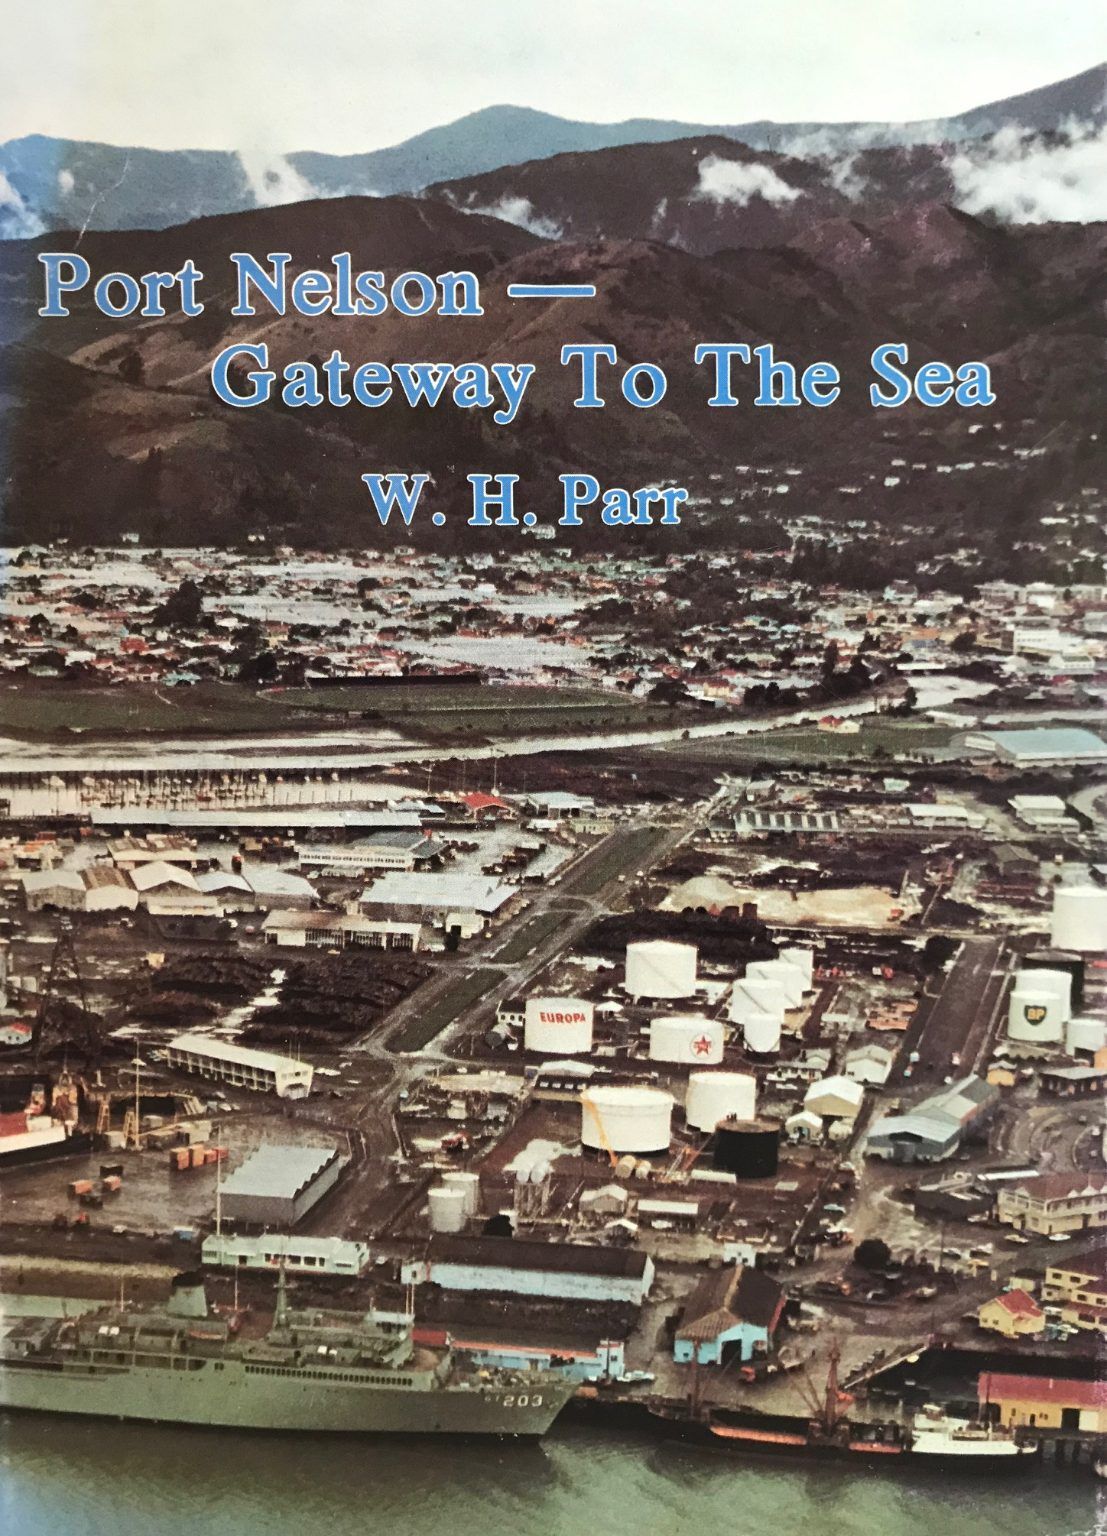 PORT NELSON: Gateway To The Sea